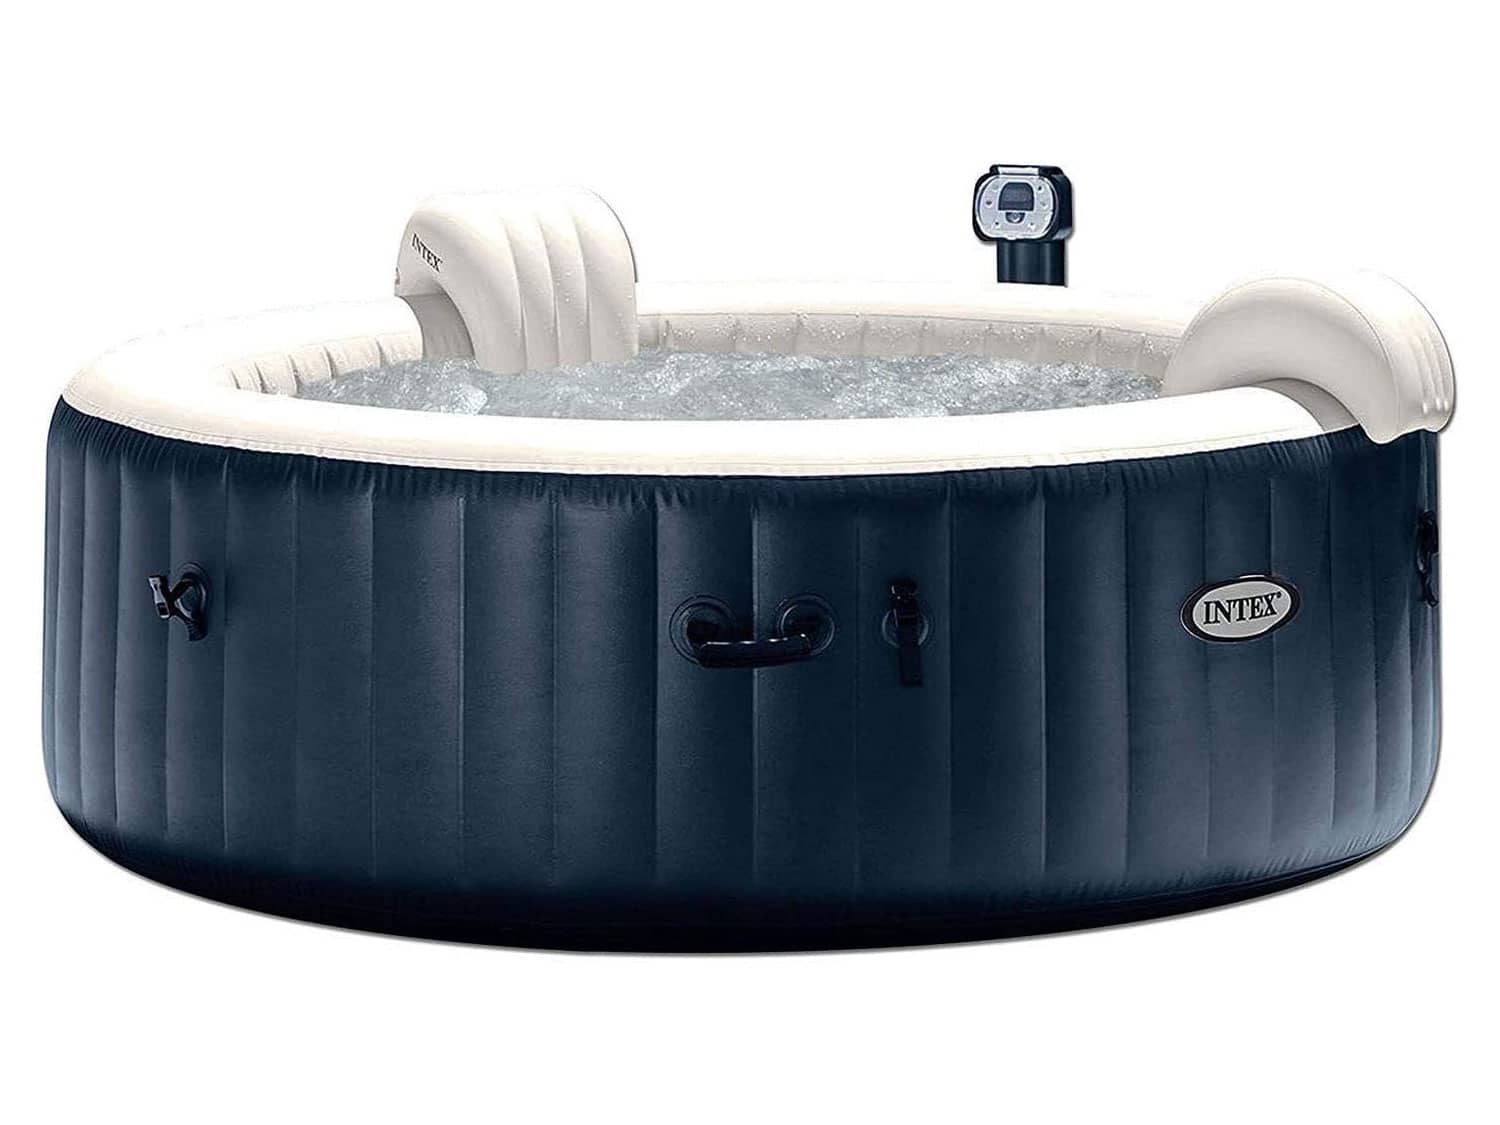 Intex 28409E PureSpa 6 Person Home Inflatable Portable Heated Round Hot Tub Spa 85-inch x 28-inch with 170 Bubble Jets and Built in Heat Pump, Blue